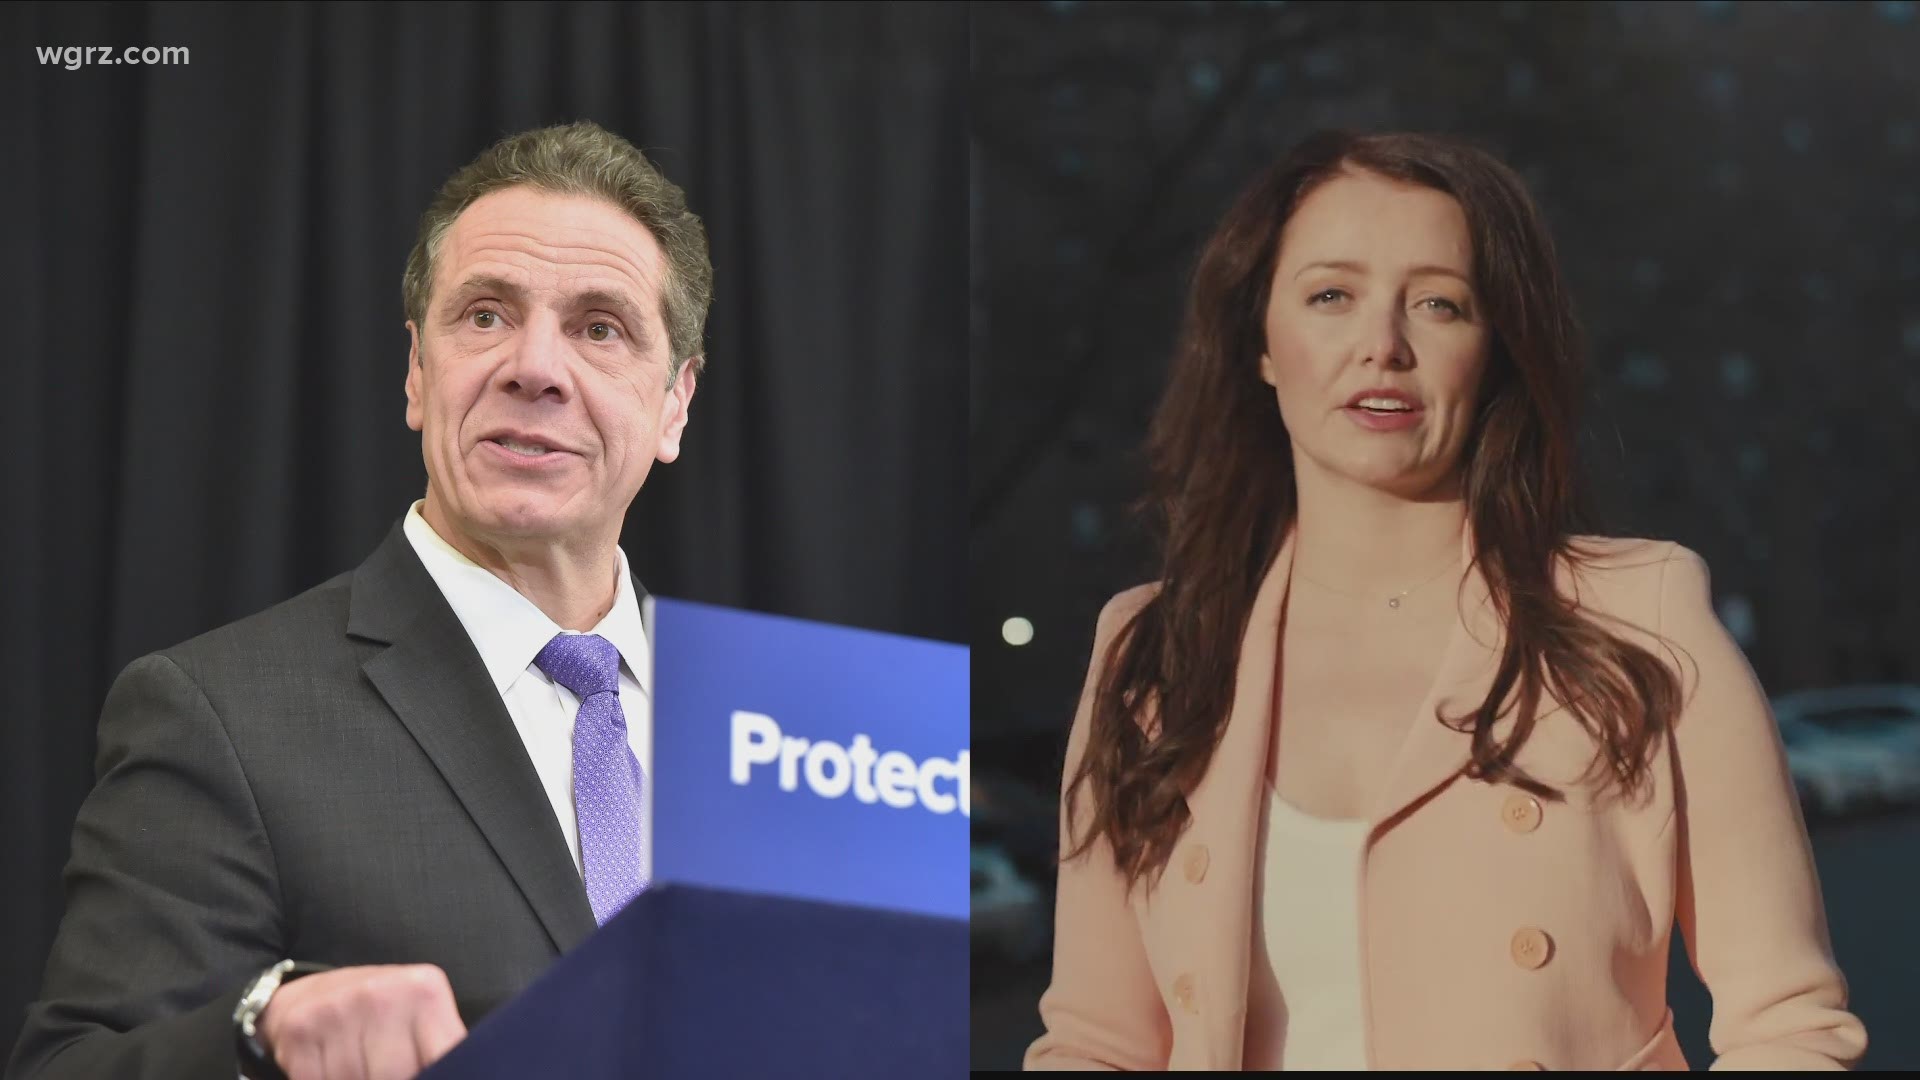 Governor Cuomo's office has issued denials.